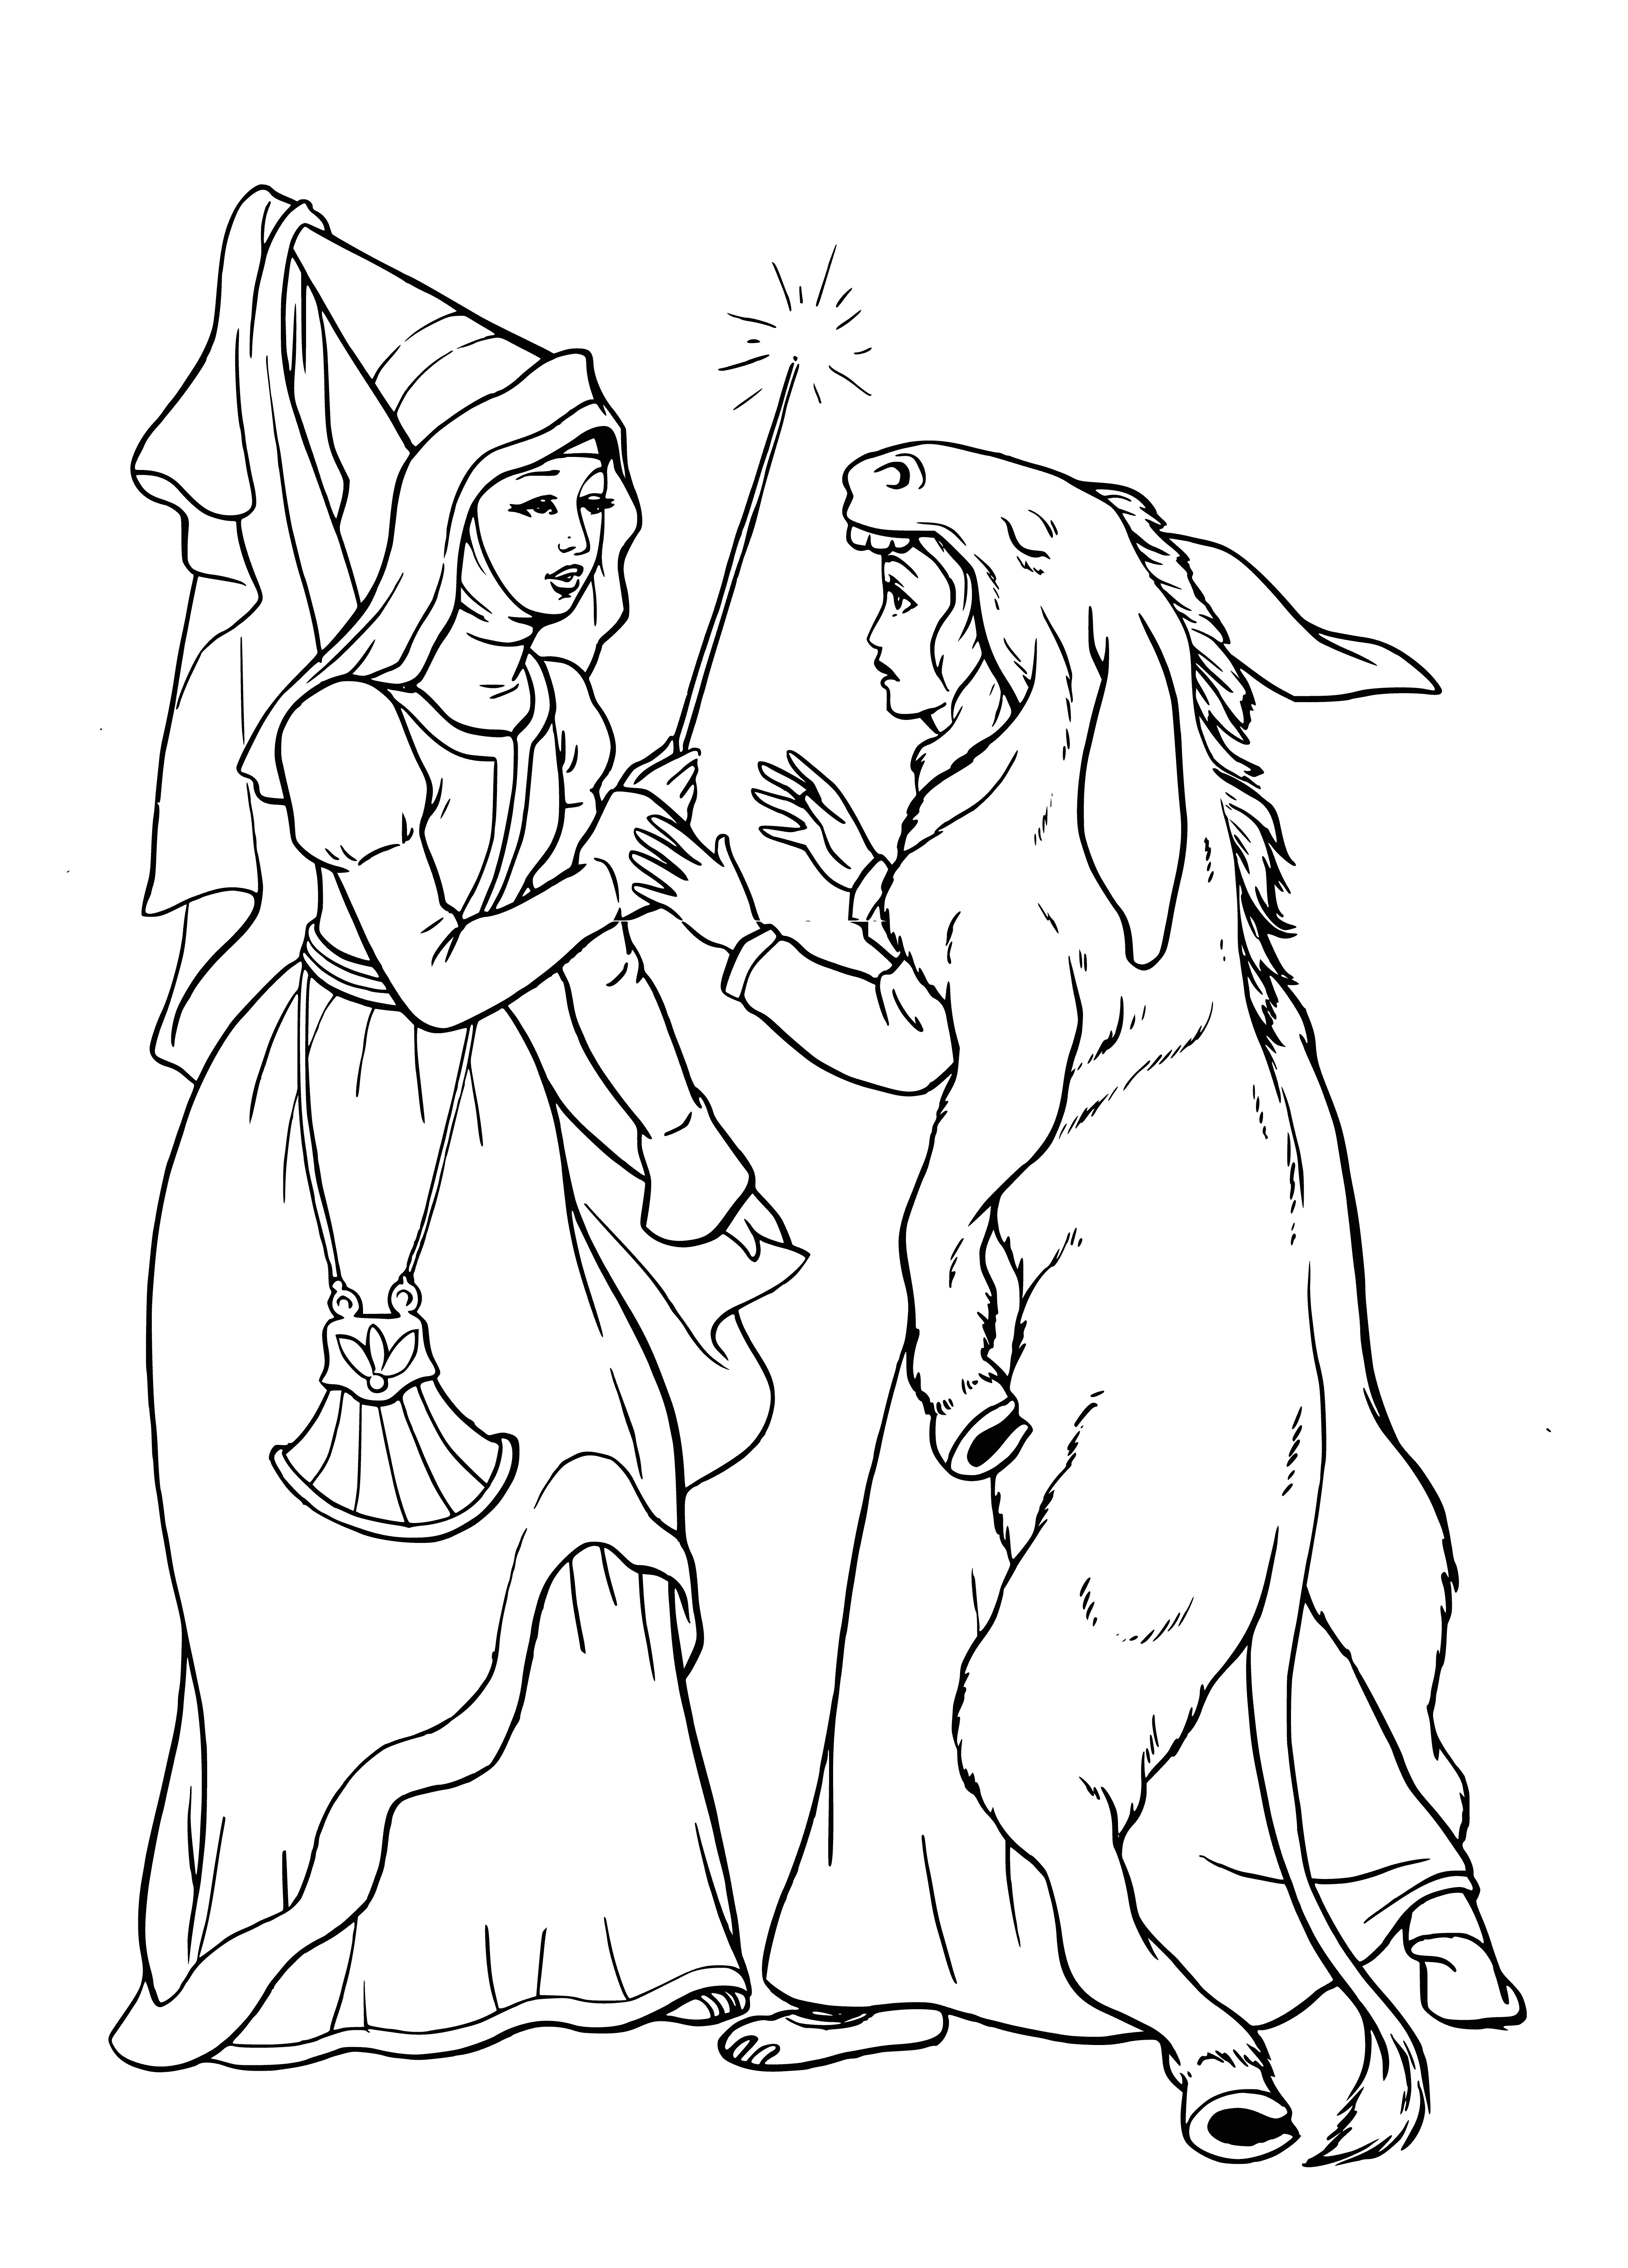 coloring page: Fairy casts spell on princess in pink dress, giving her happily ever after.